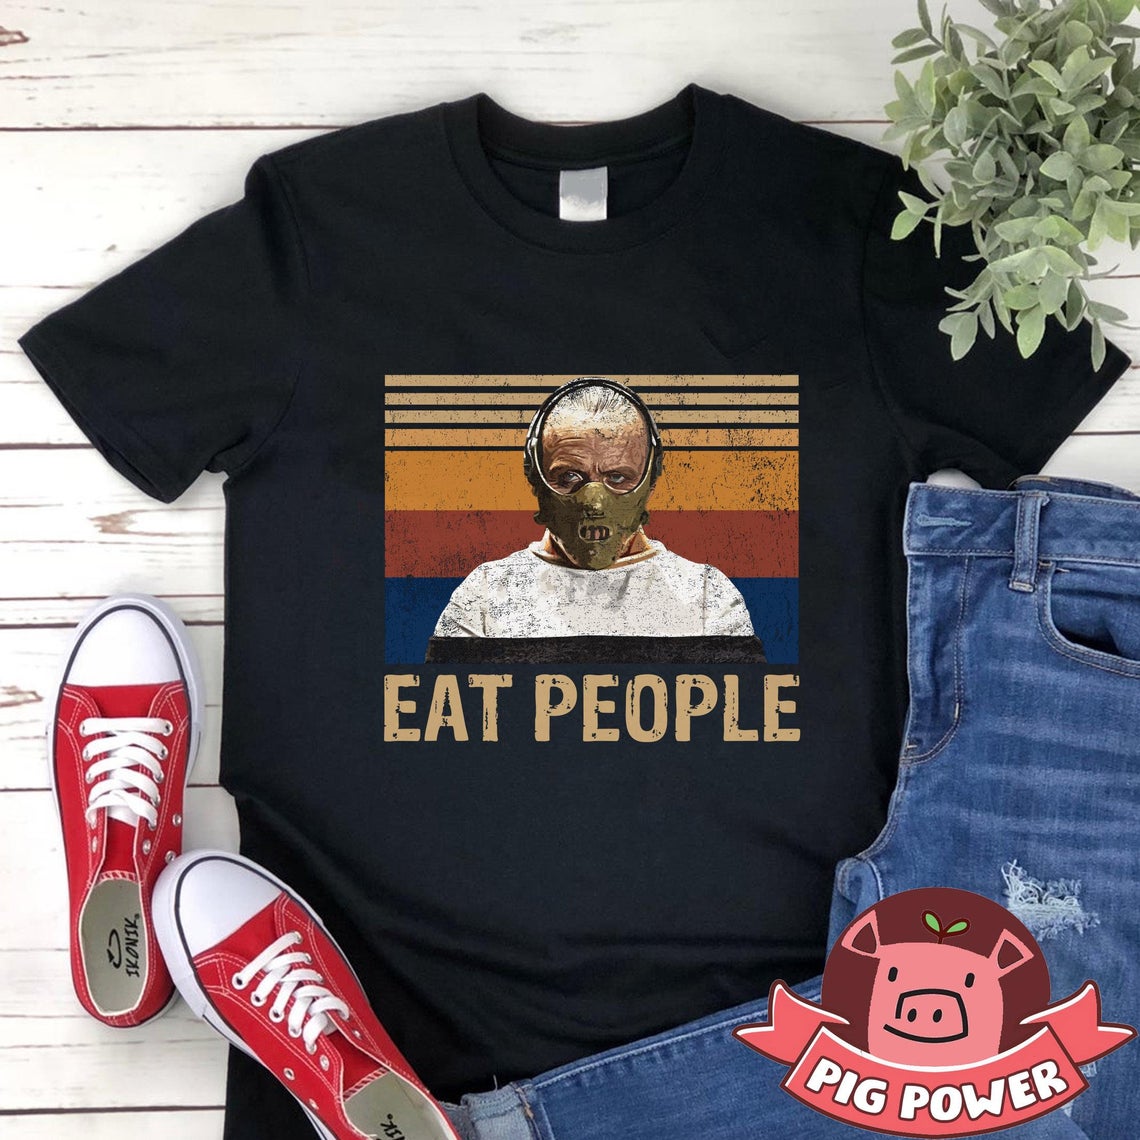 Eat People Shirt Vintage Hannibal Lecter Tee Red Dragon The Silence Of The Lamb